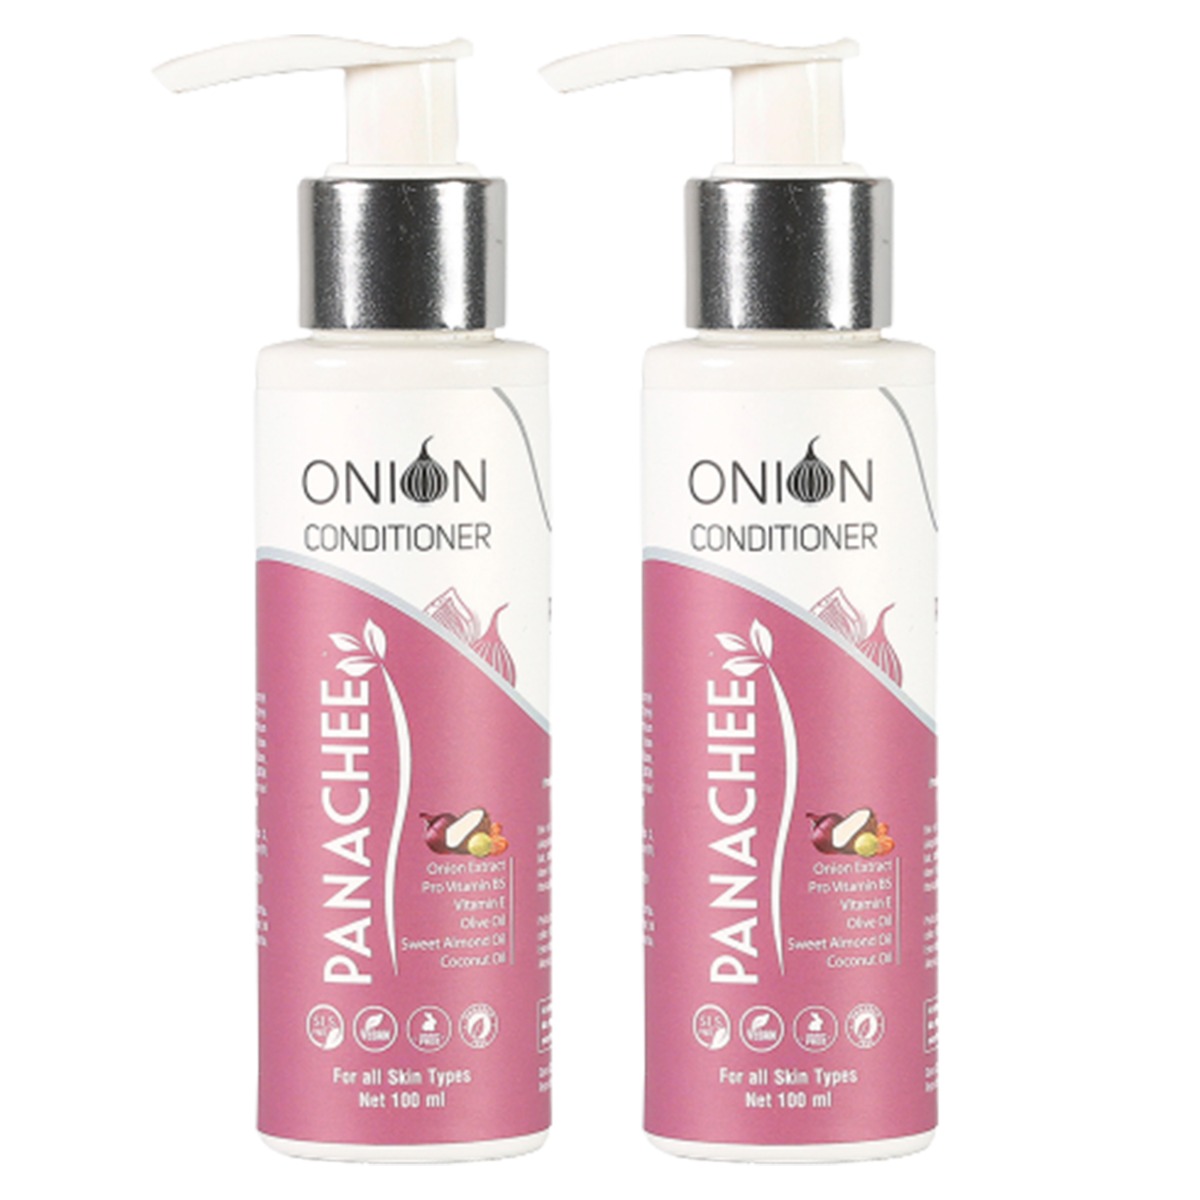 Panachee Onion Conditioner, 100ml Each - Pack of 2